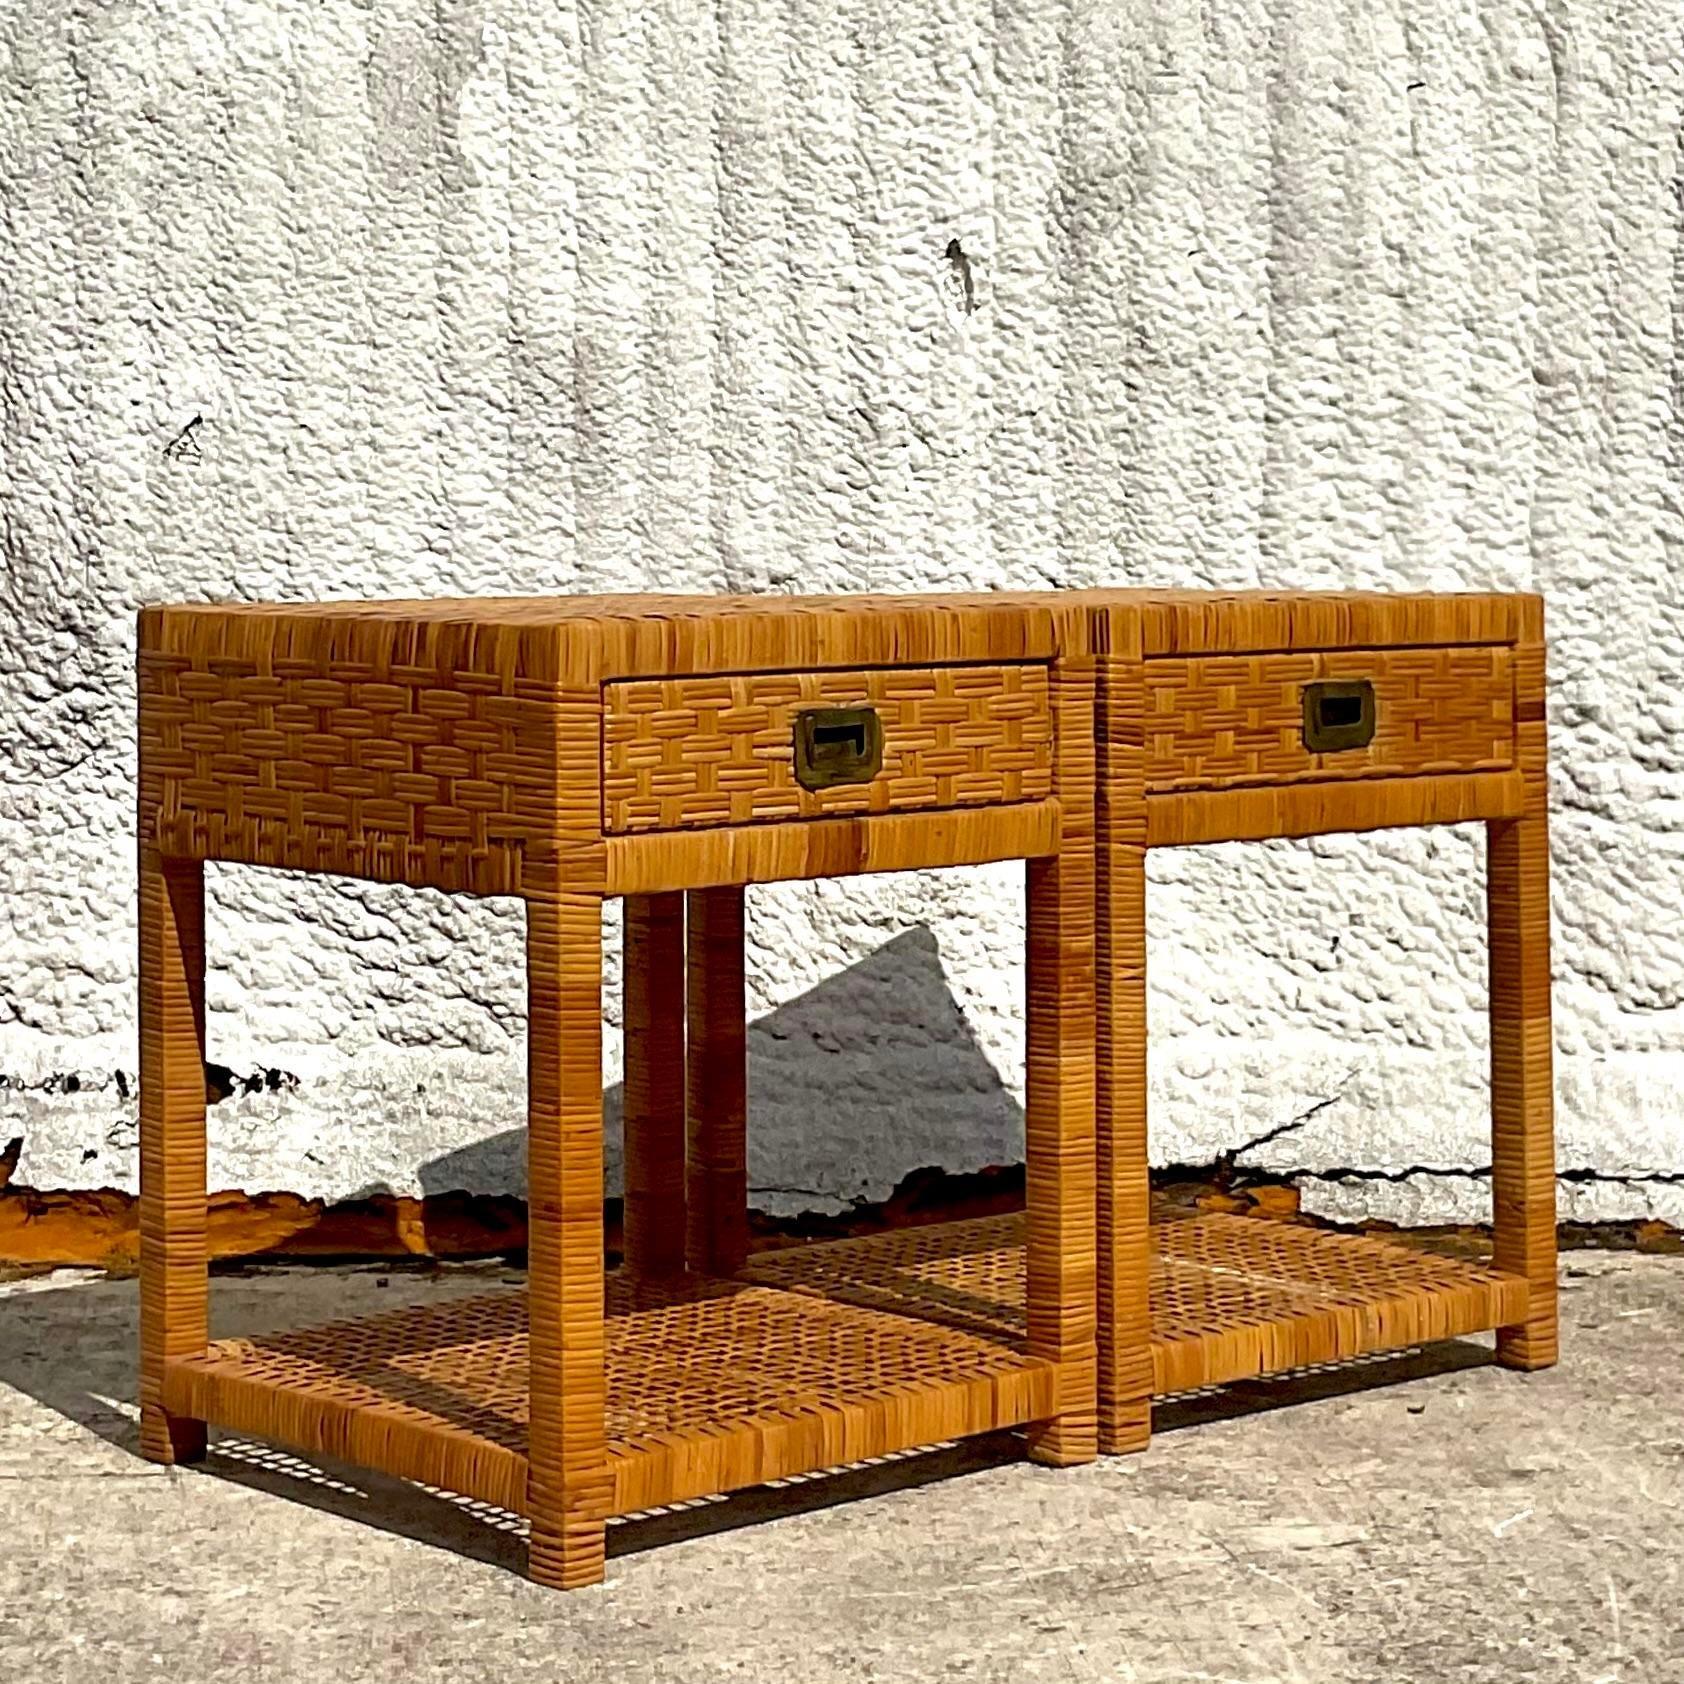 Late 20th Century Vintage Coastal Woven Rattan Nightstands - a Pair For Sale 2